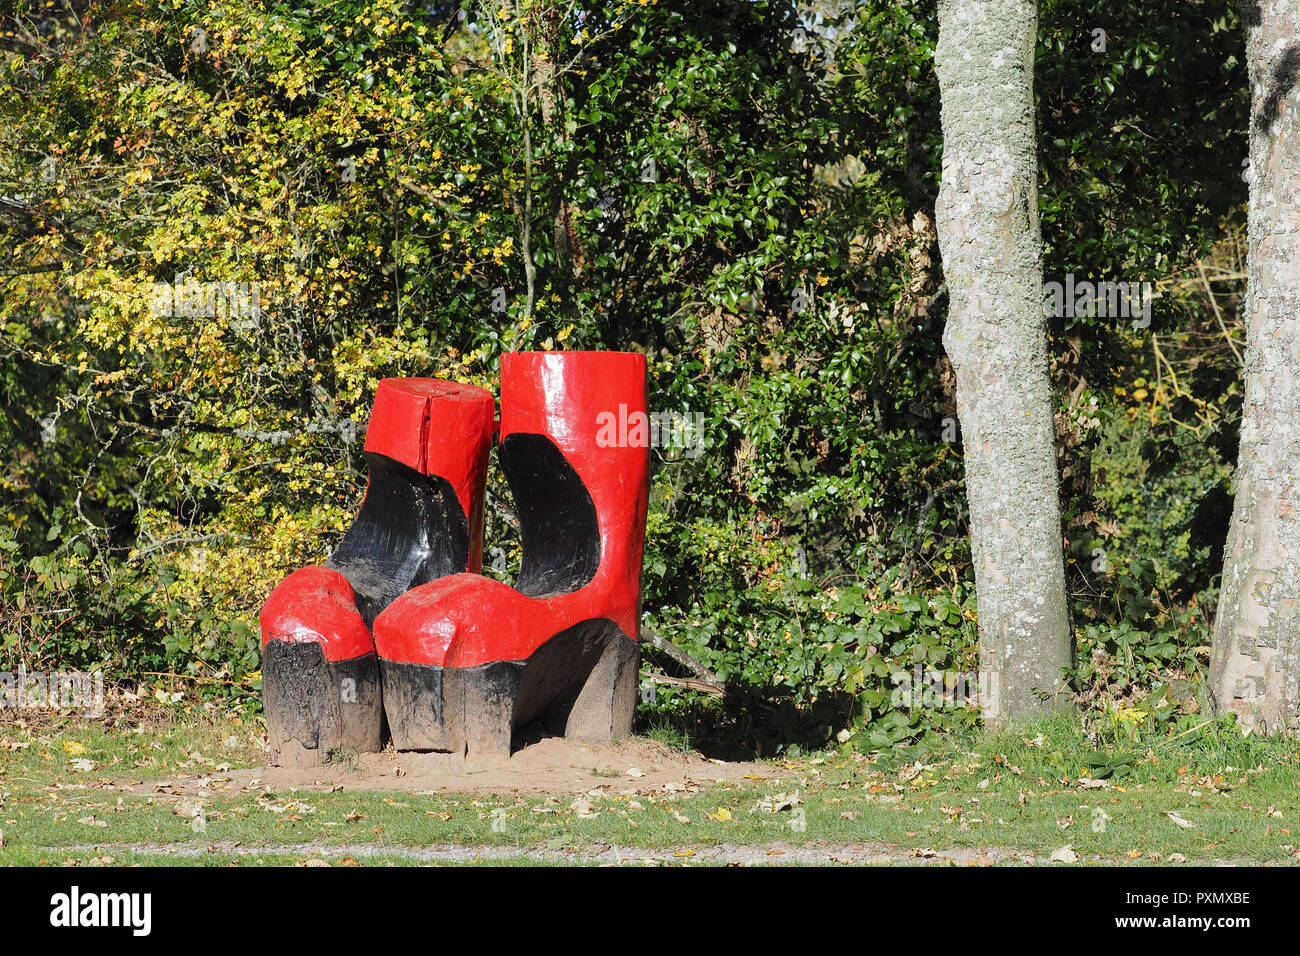 Wood carving called Foot in both camps at Inch field beside Cahir castle, County Tipperary, Ireland Stock Photo